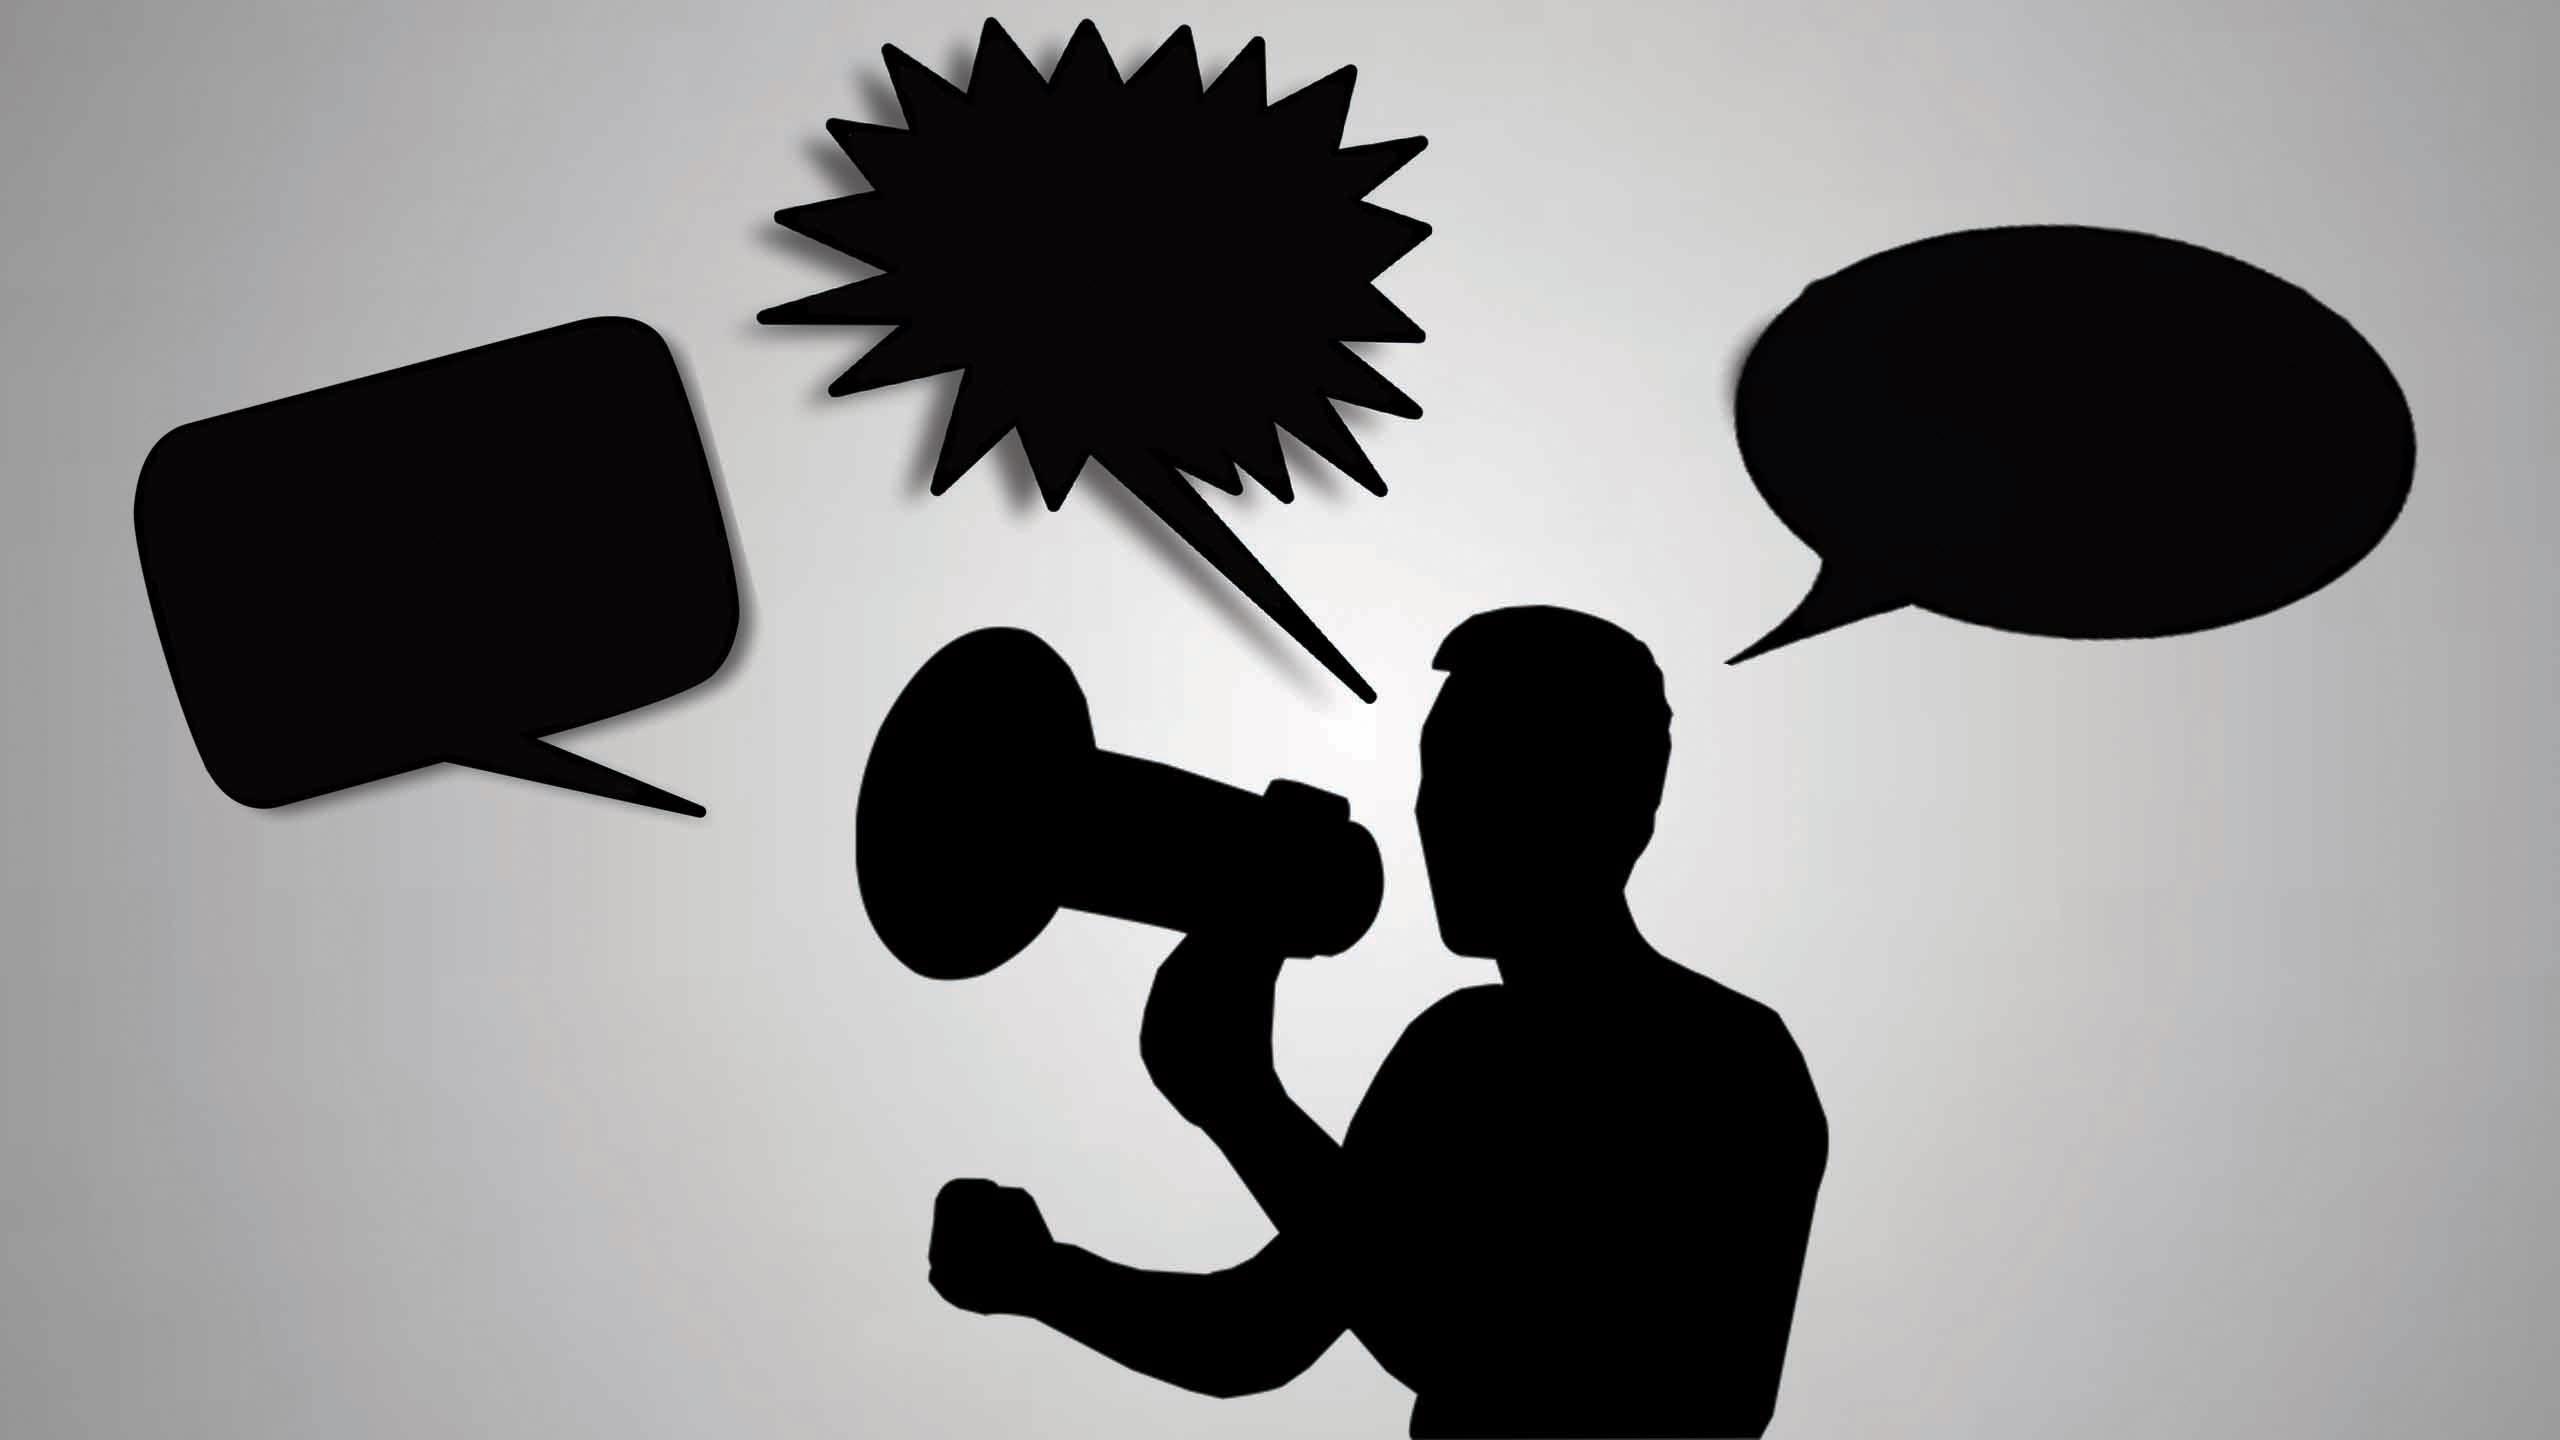 A silhouette of a man yelling into a loudspeaker. Speech bubbles float above his head.